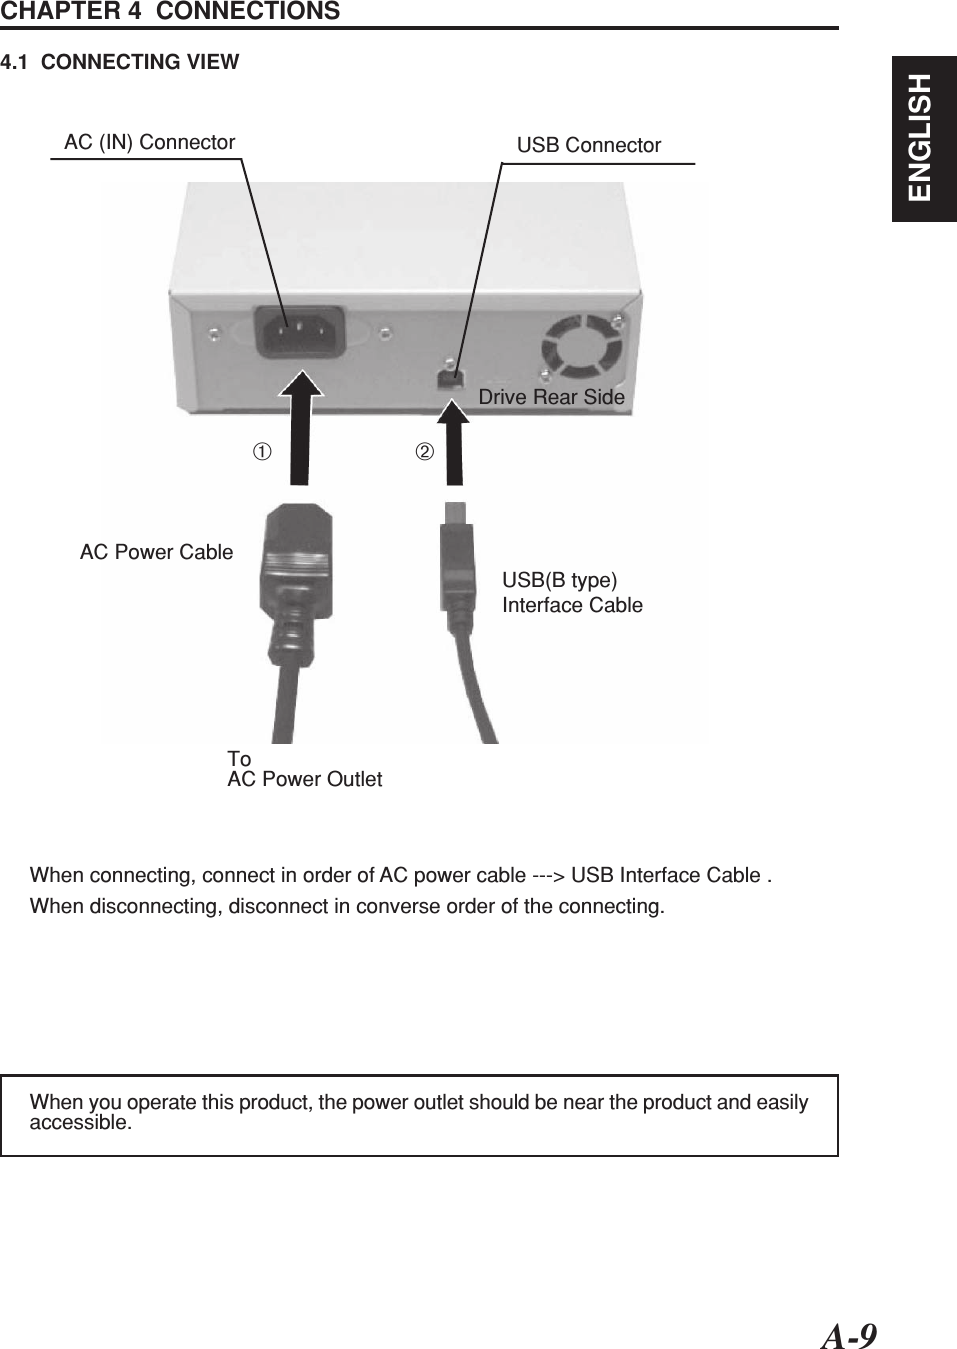 A-9ENGLISHCHAPTER 4  CONNECTIONS4.1  CONNECTING VIEWAC (IN) ConnectorAC Power CableUSB(B type)Interface CableDrive Rear SideUSB ConnectorWhen you operate this product, the power outlet should be near the product and easilyaccessible.ToAC Power Outlet➀➁When connecting, connect in order of AC power cable ---&gt; USB Interface Cable .When disconnecting, disconnect in converse order of the connecting.